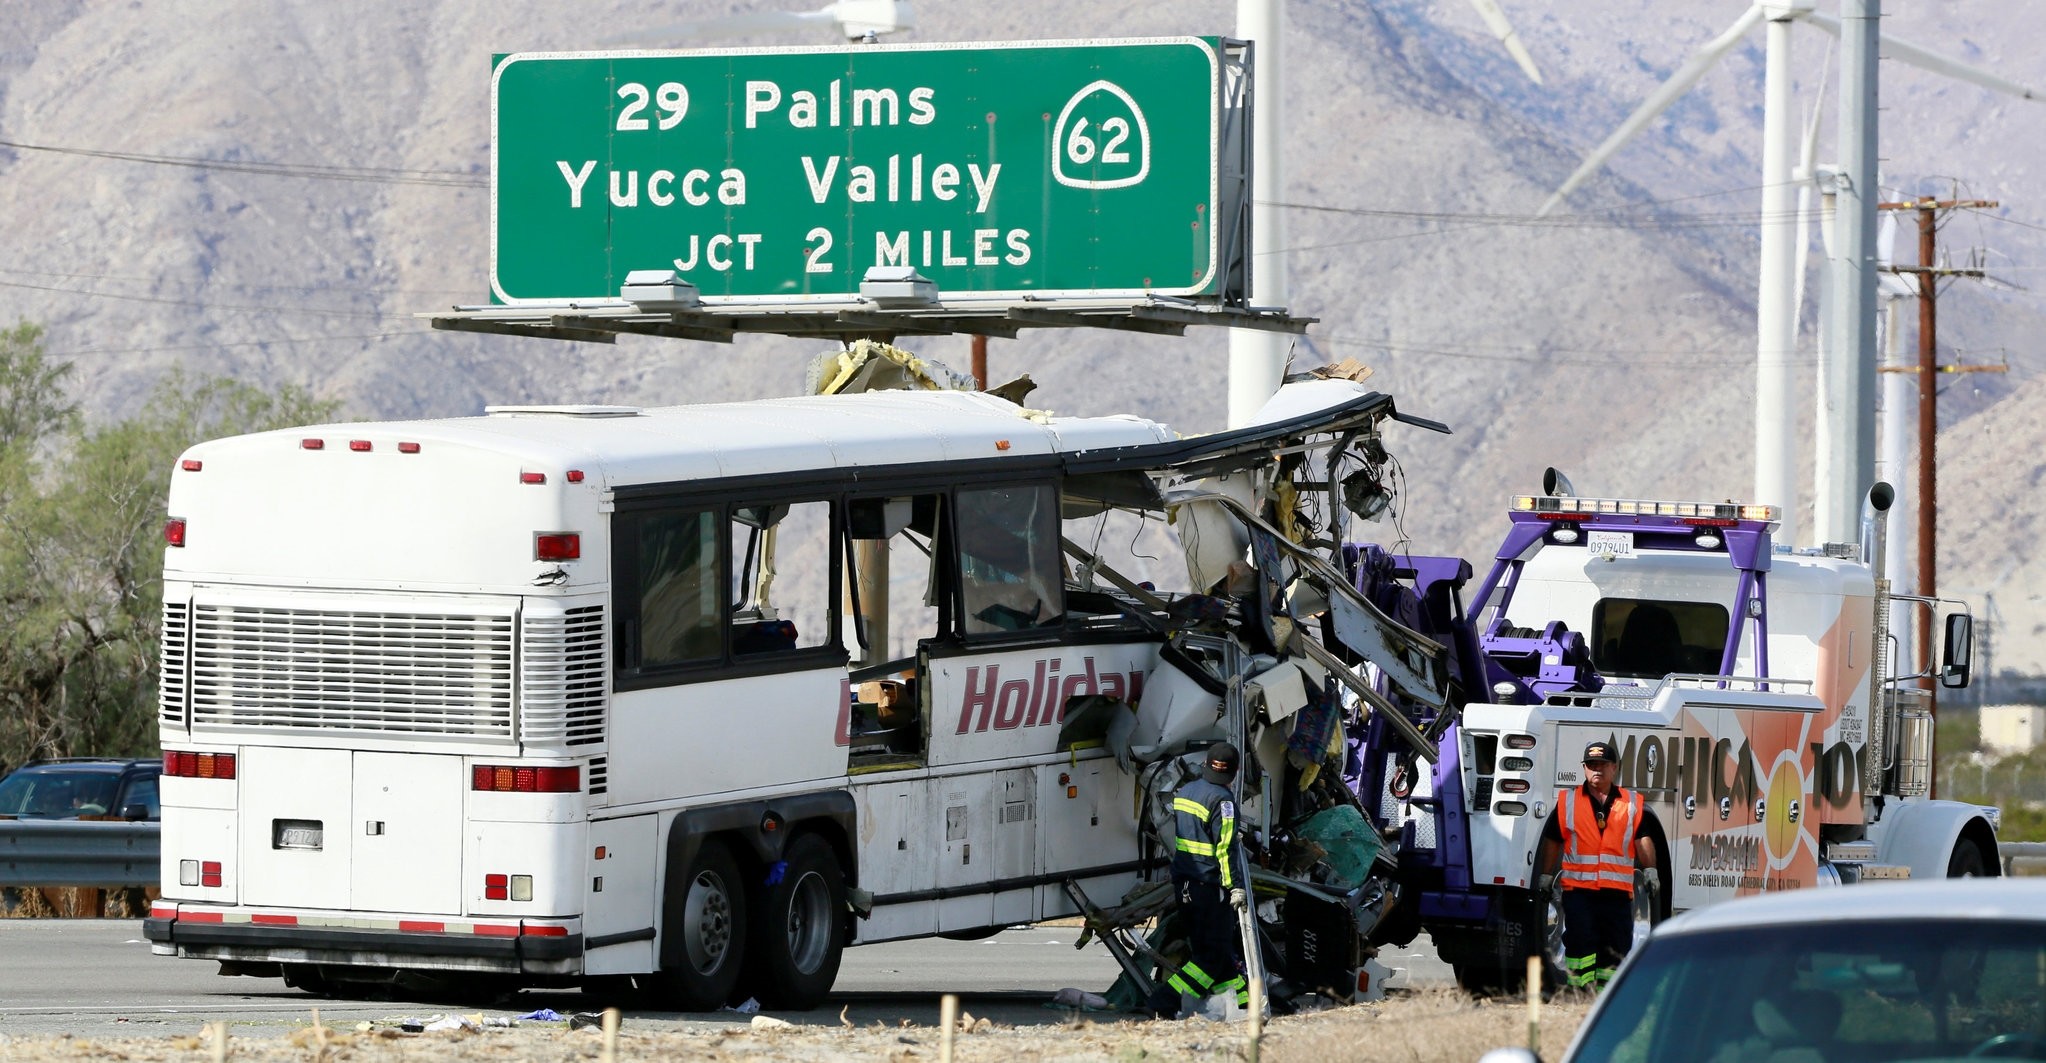 A mangled bus from the Holiday Bus Lines is seen after being towed from the scene of a mass casualty crash near Palm Springs, California October 23, 2016. (REUTERS Photo)